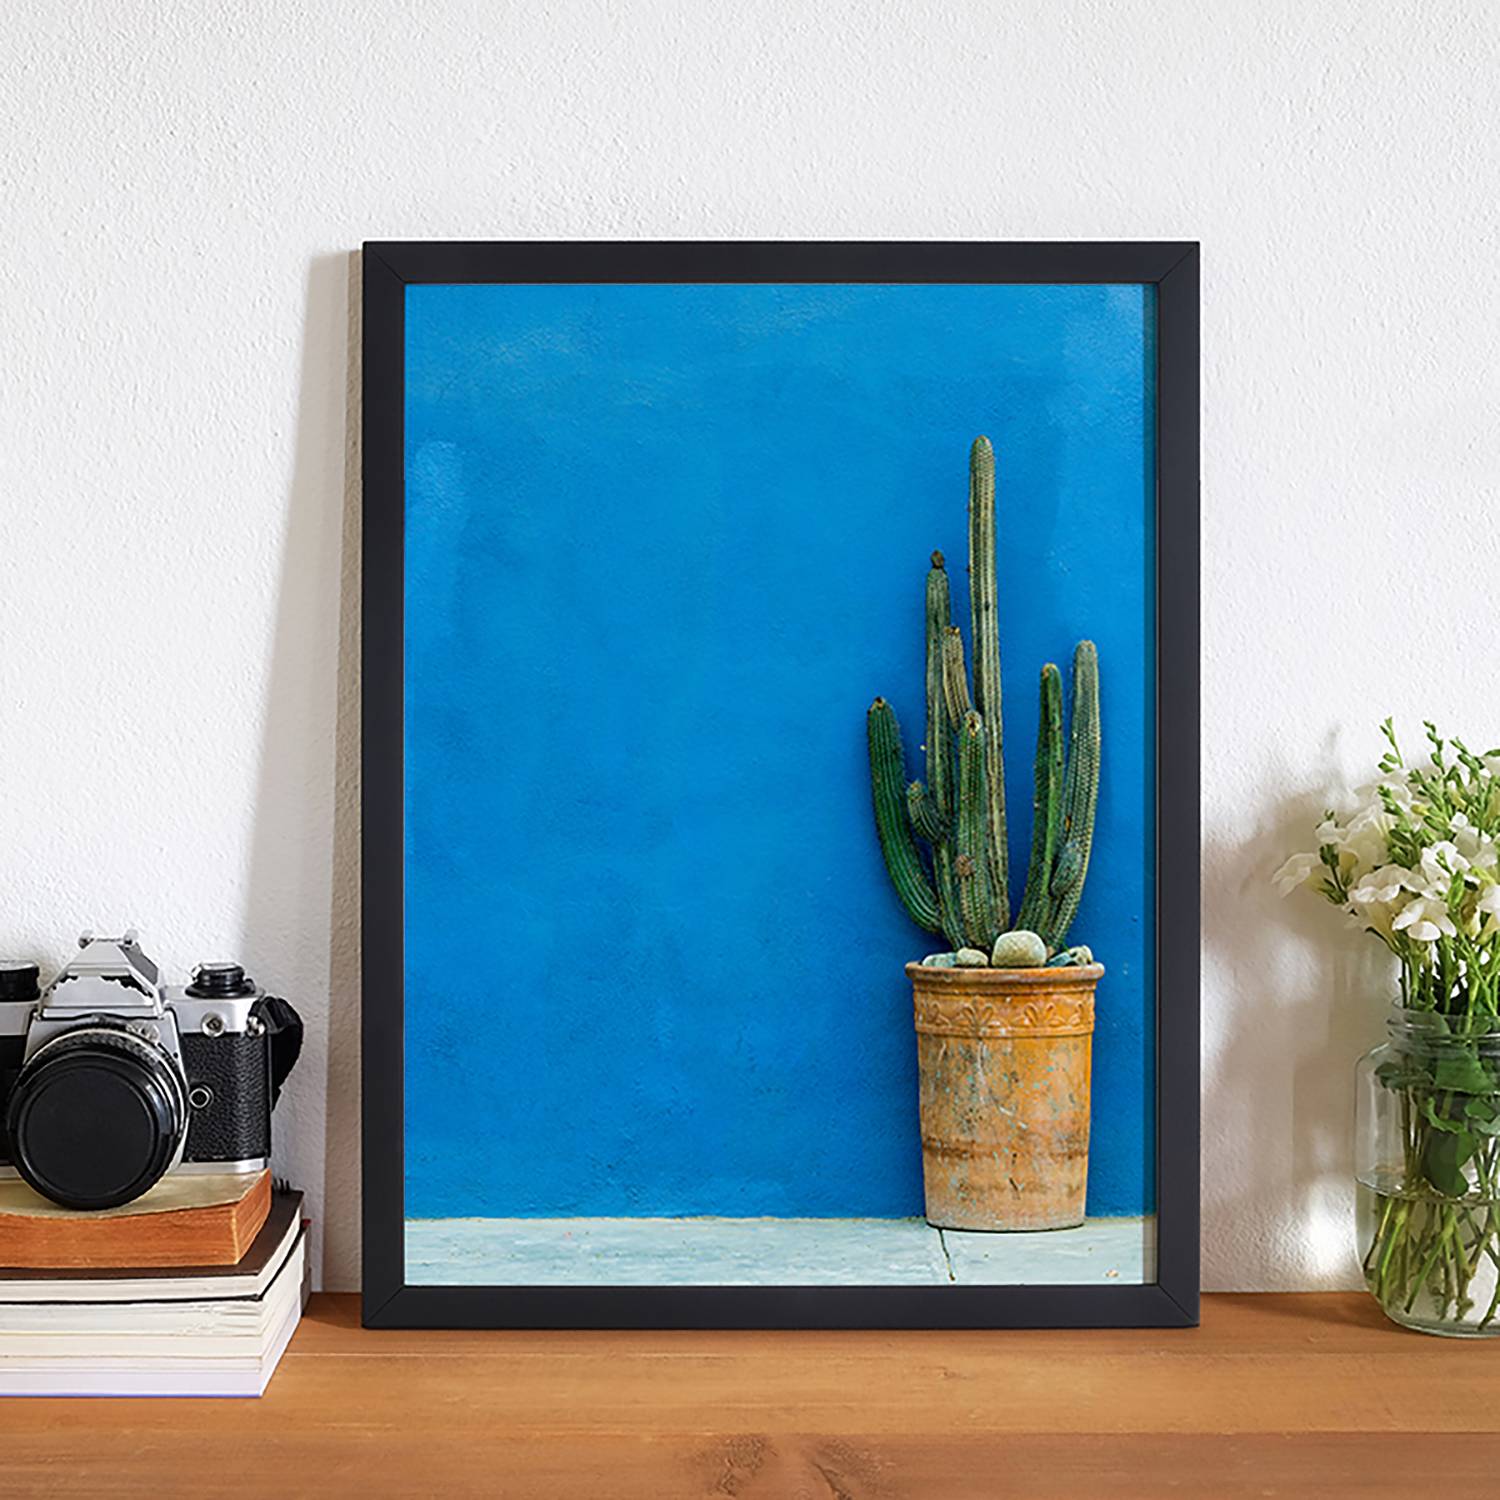 Bild Blue Wall with Cactus von Any Image